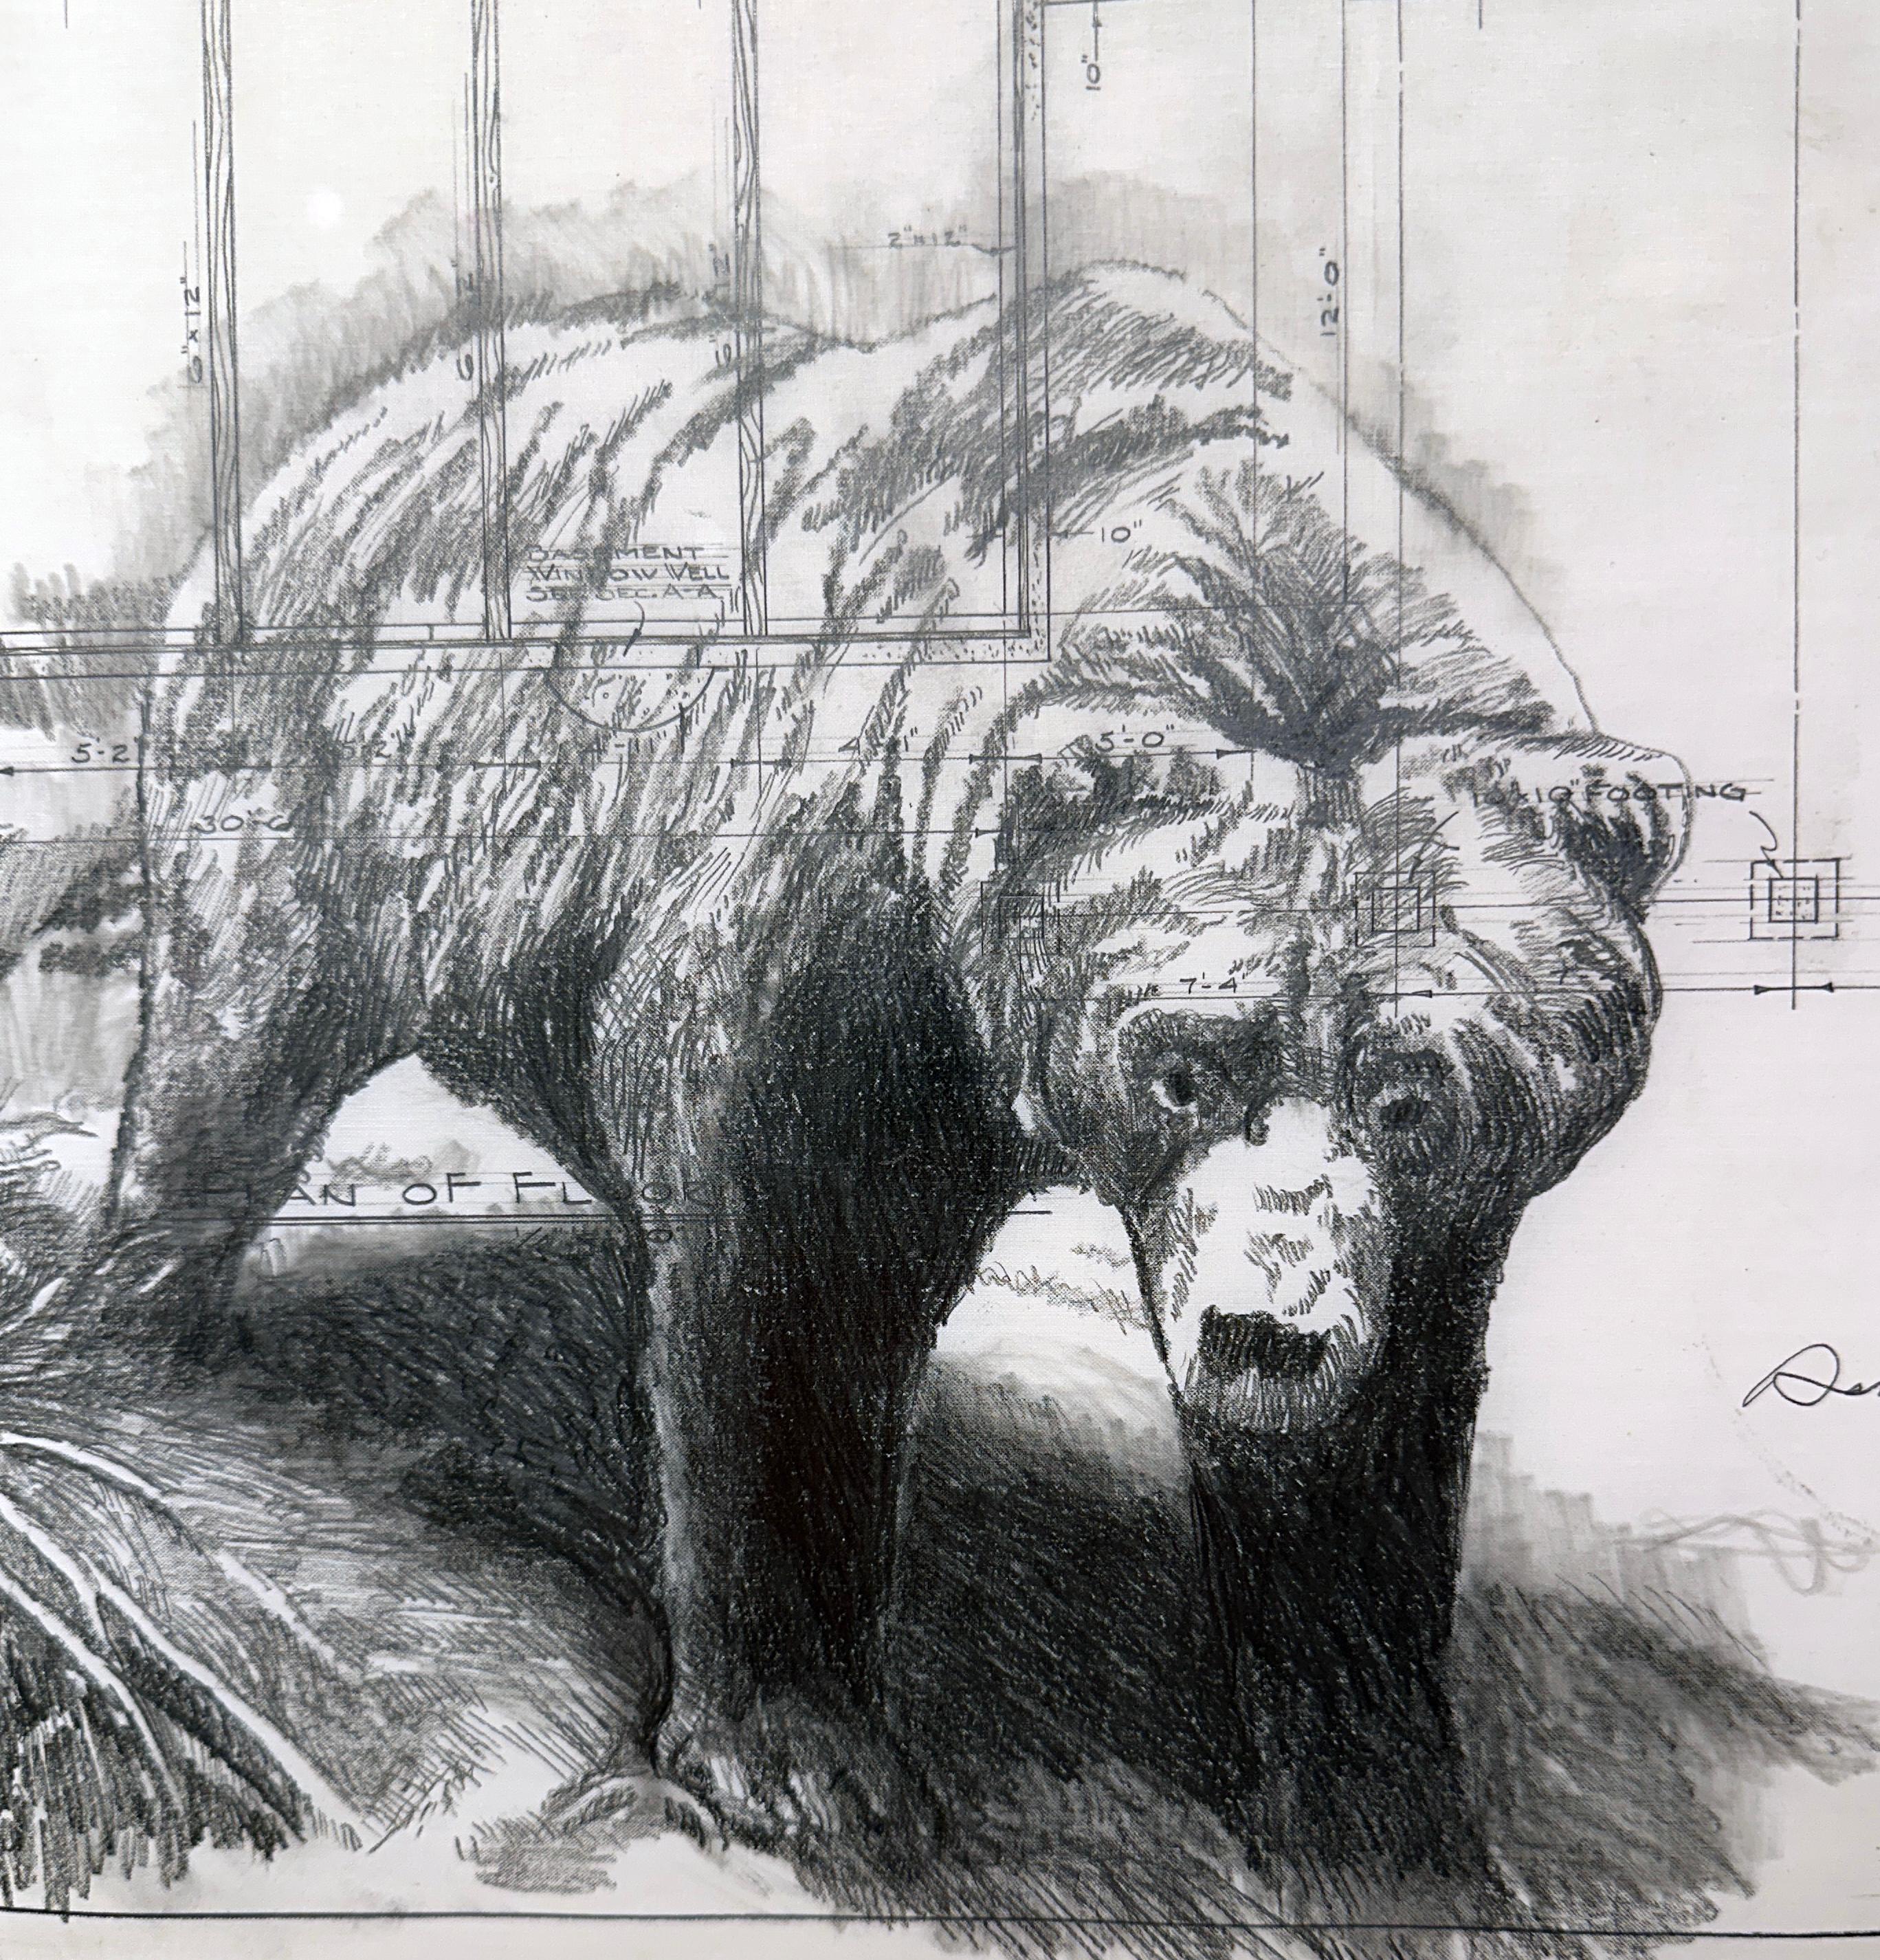 Solid Footings - Graphite Drawing on Antique Architectural Drawings of Bears - Contemporary Art by Don Pollack